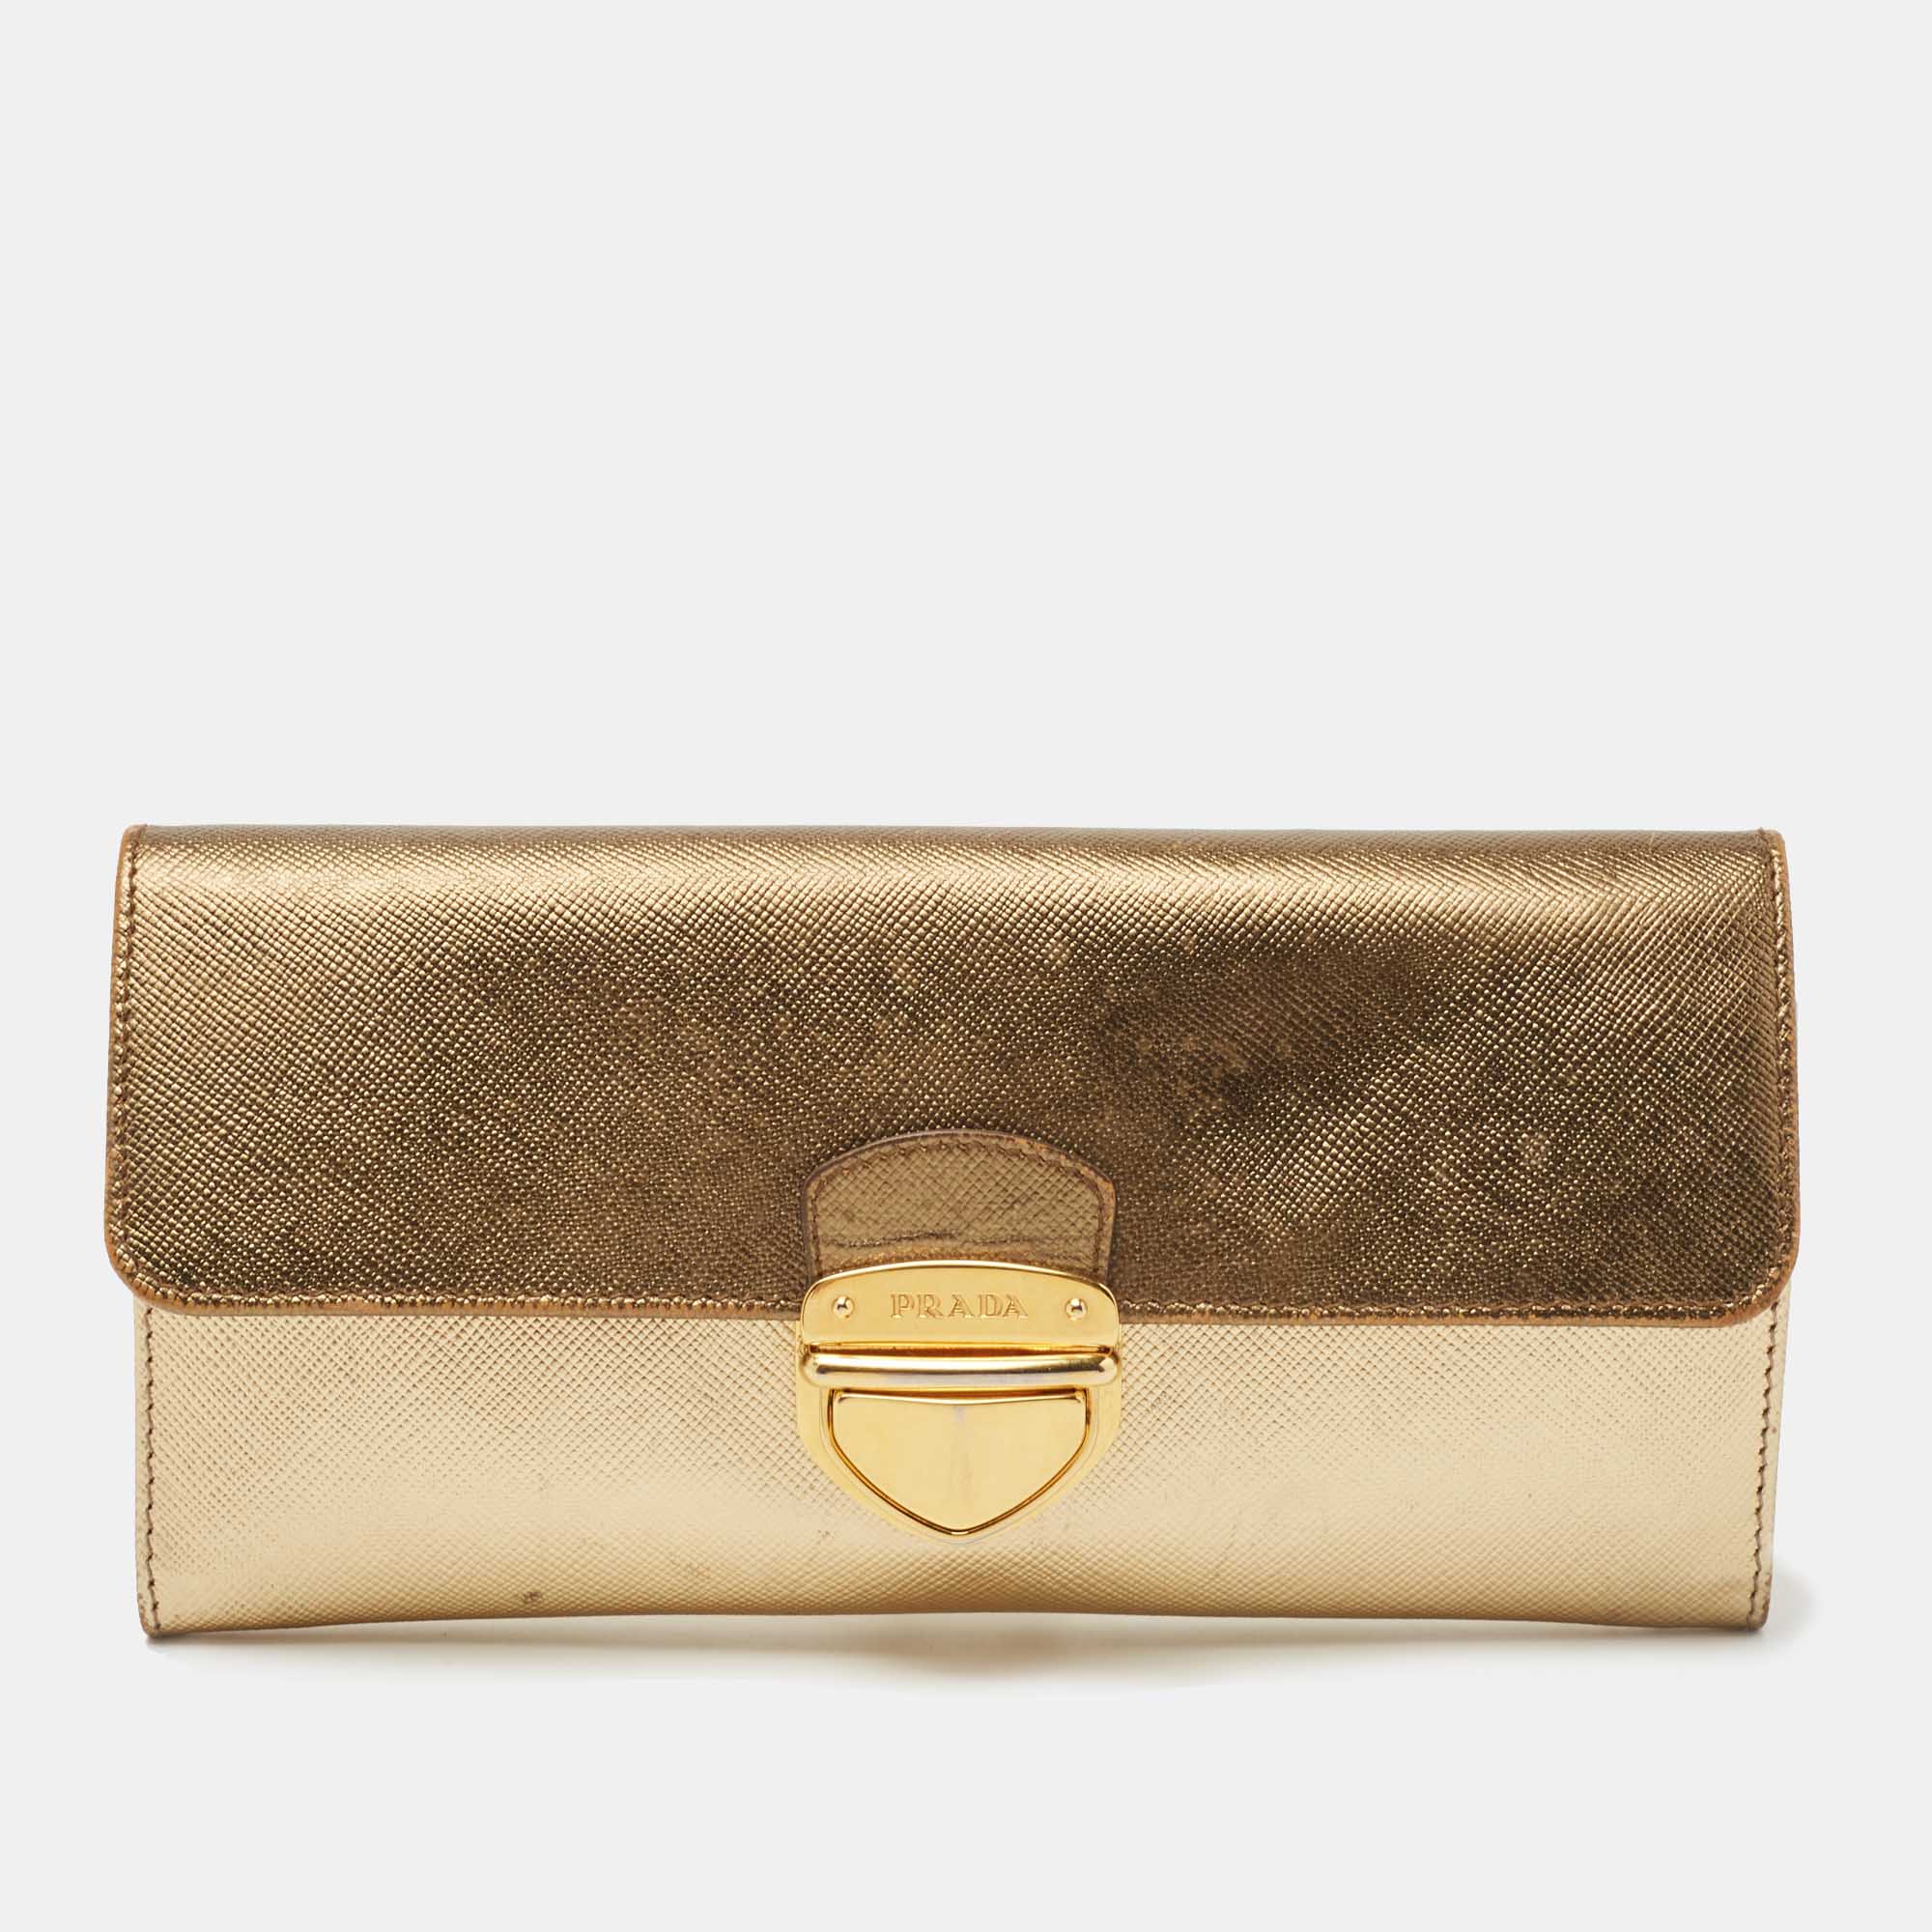 PRADA Clutch bag gold gold leather Intrecciato from japan 